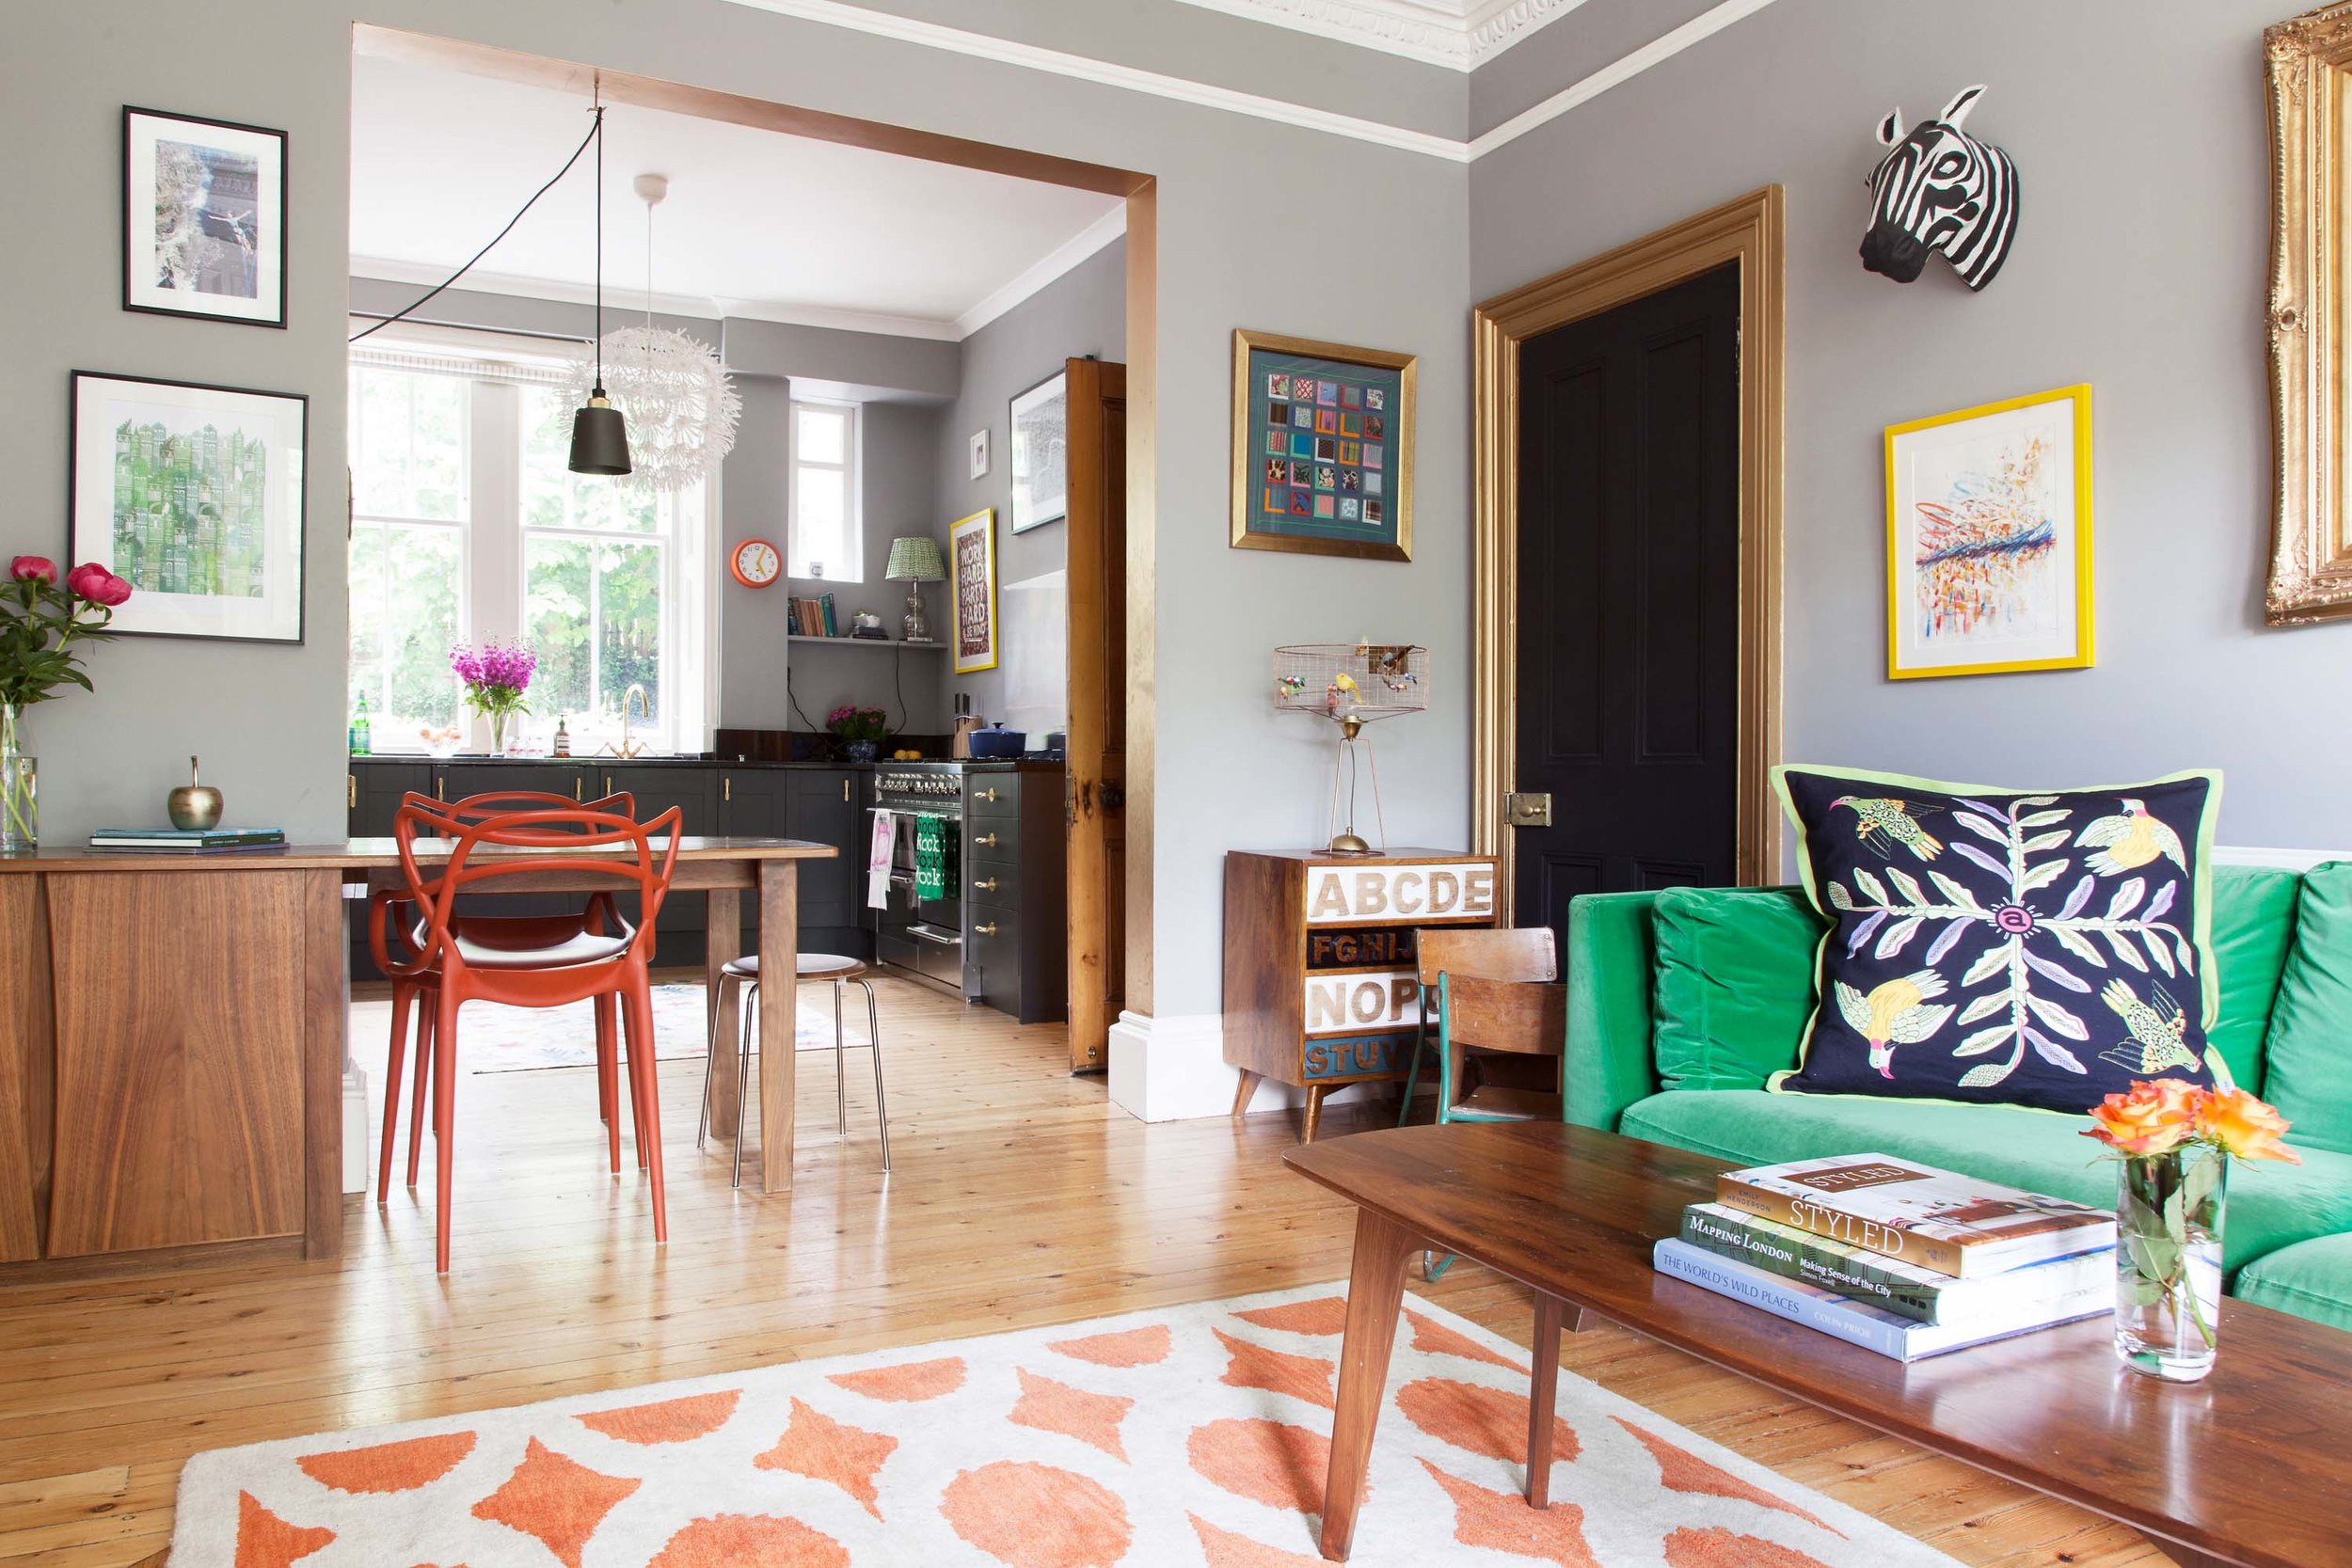 The Pink House, as seen on Apartment Therapy/Photo: Susie Lowe